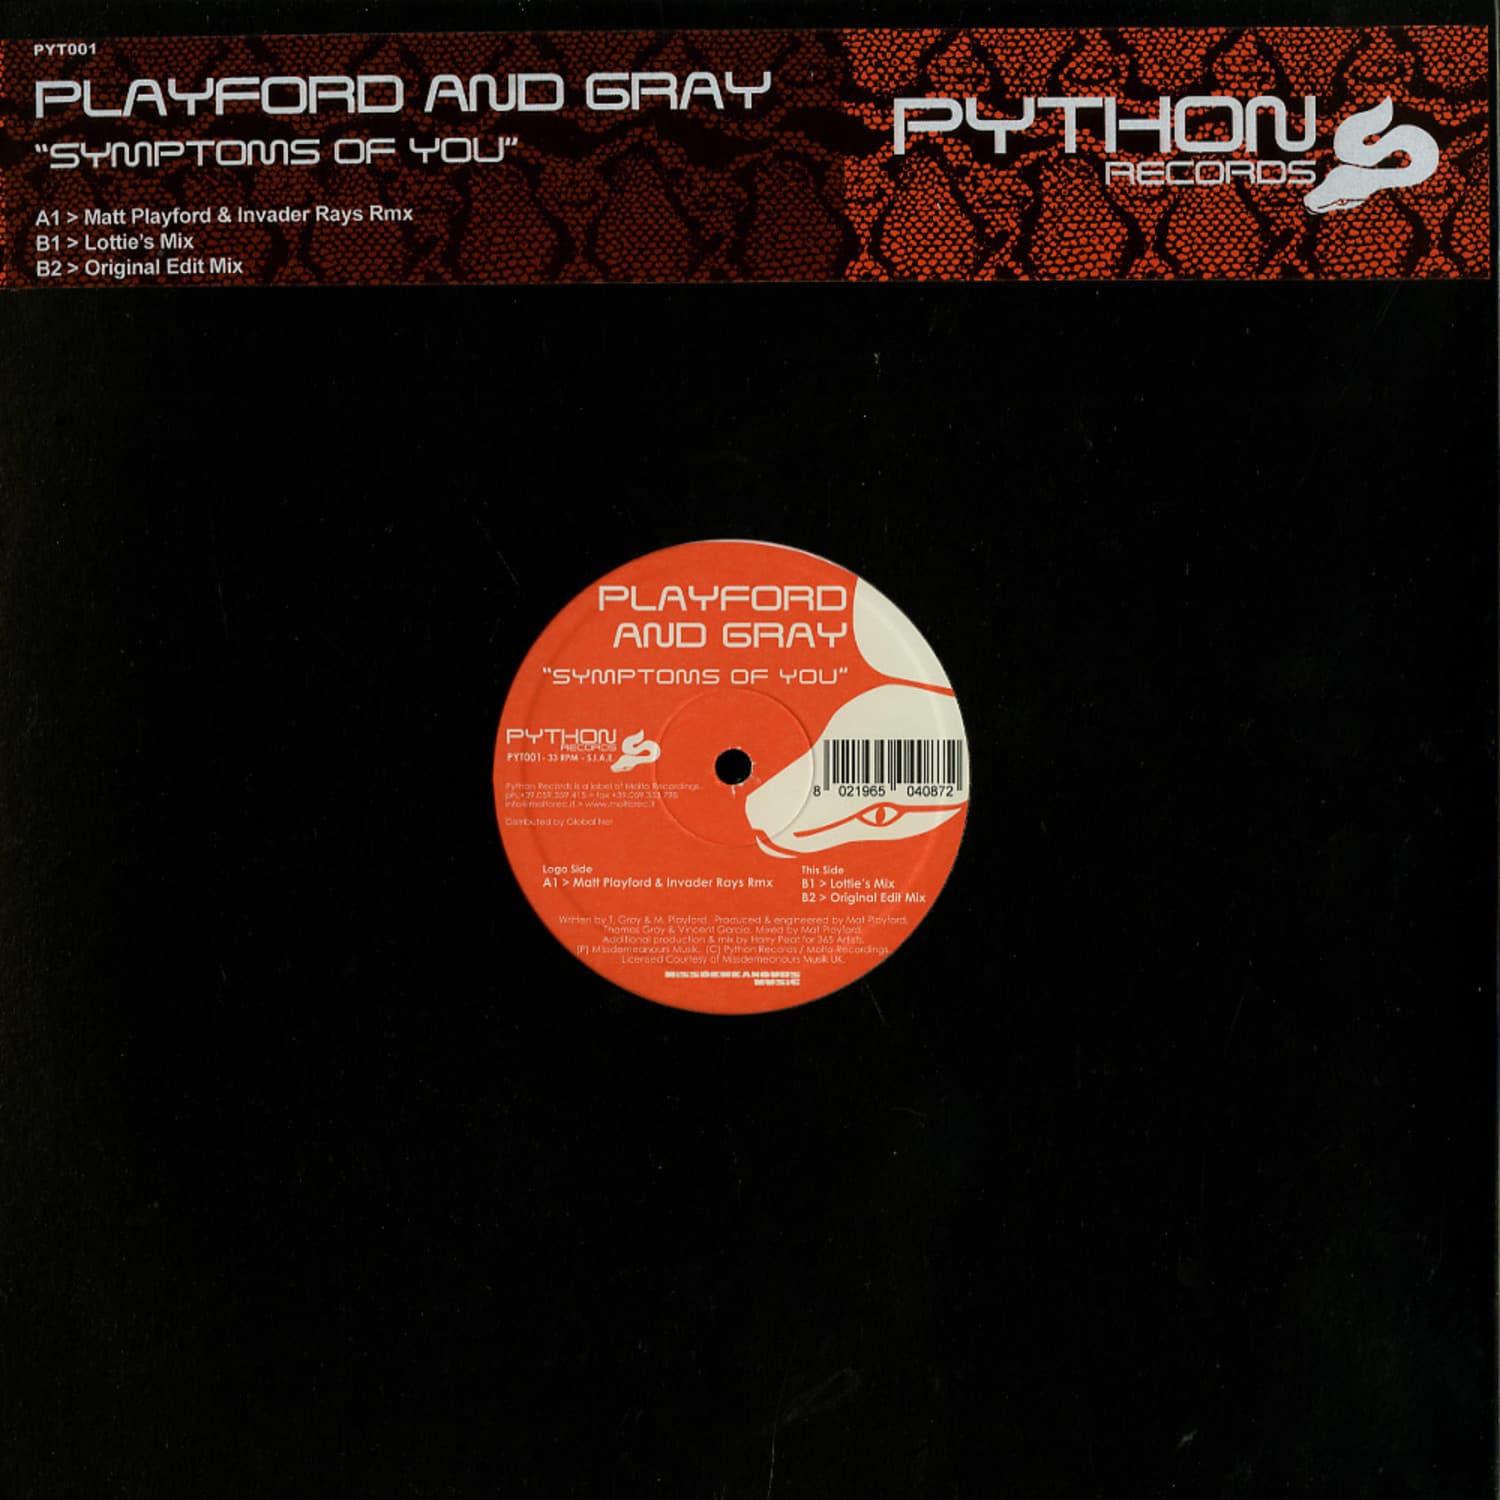 Playford And Gray - SYMTOMS OF YOU